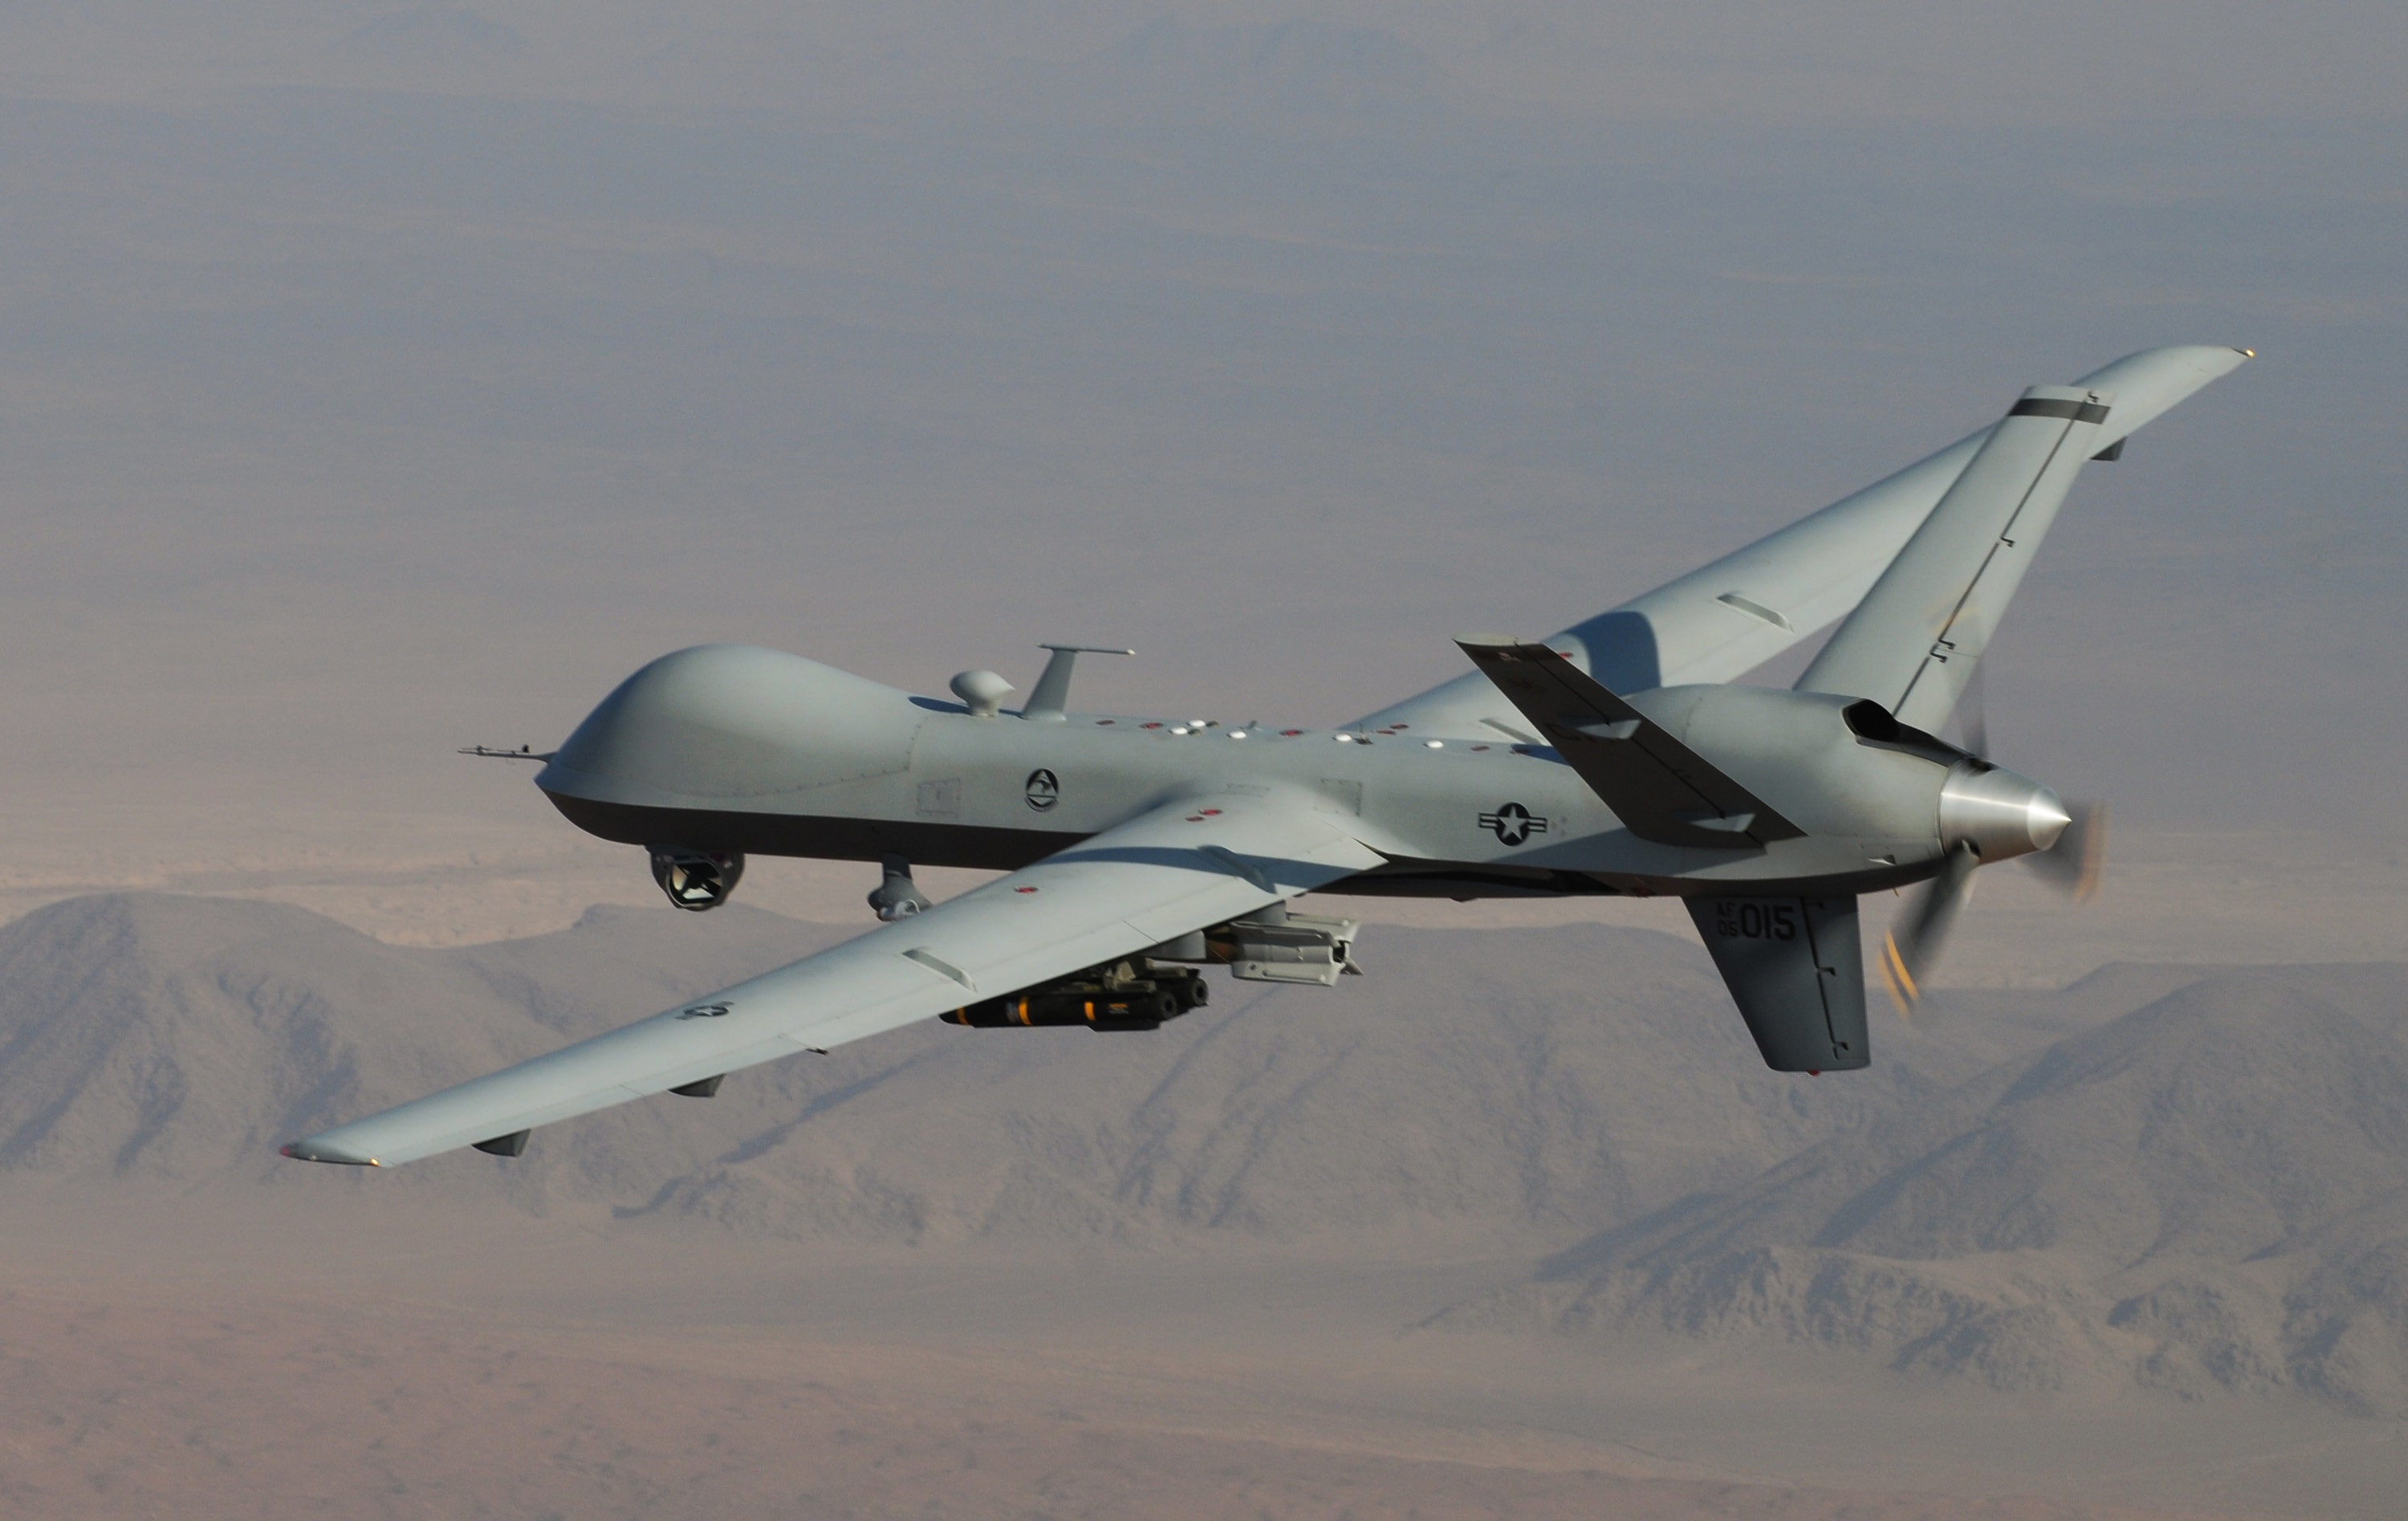 FOX NEWS: AI-enabled Air Force unmanned drones will 'dogfight' manned fighter jets